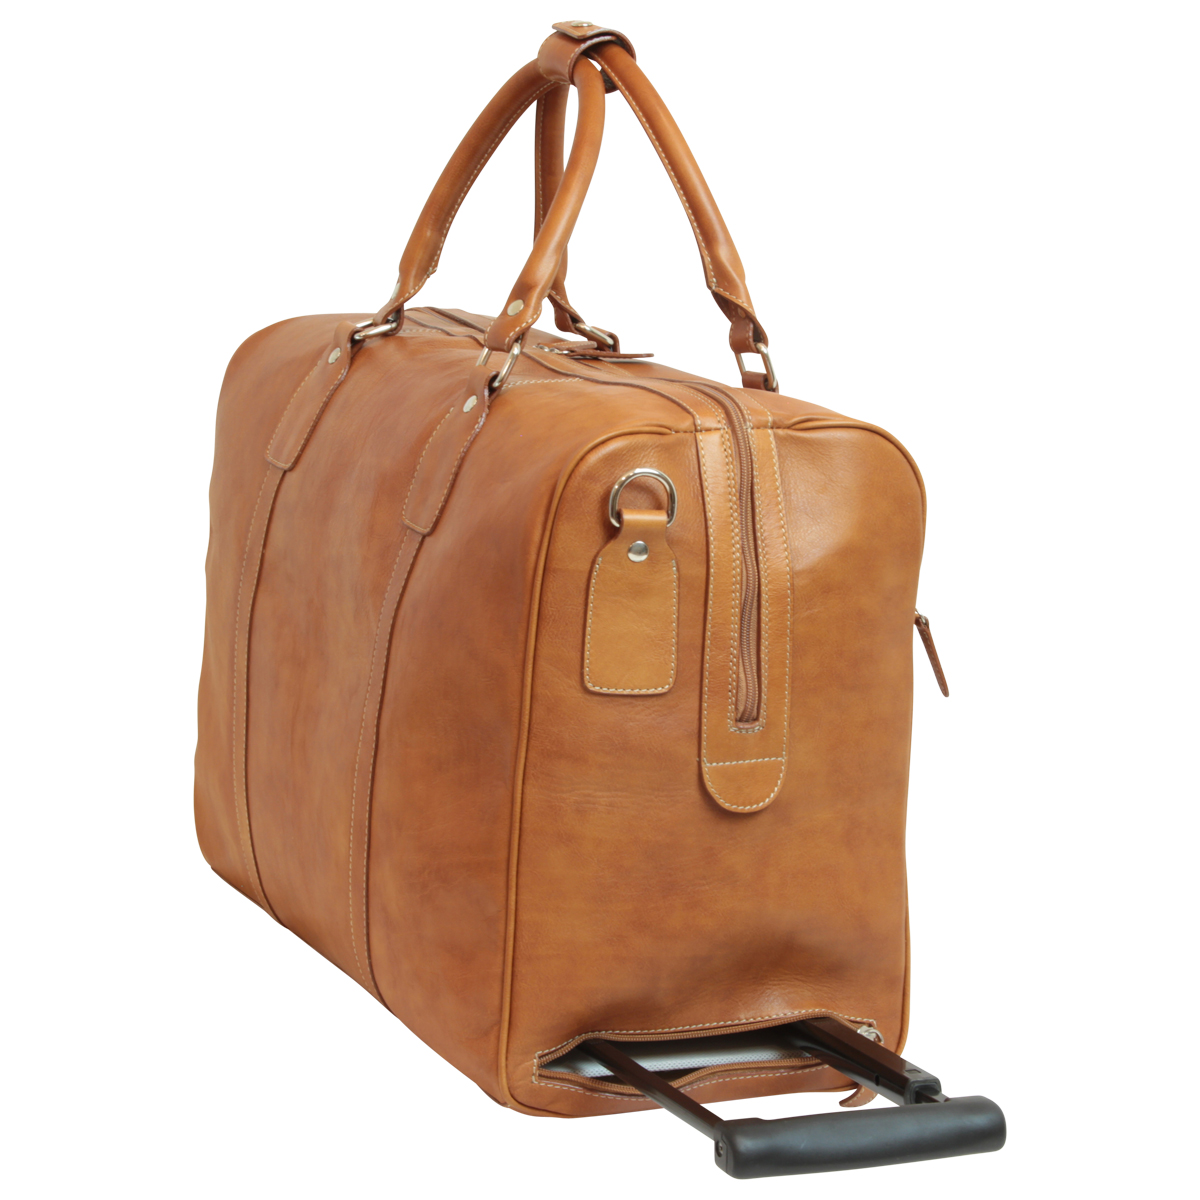 Oiled Calfskin leather duffel bag - Colonial Brown | 001561CO UK | Old Angler Firenze